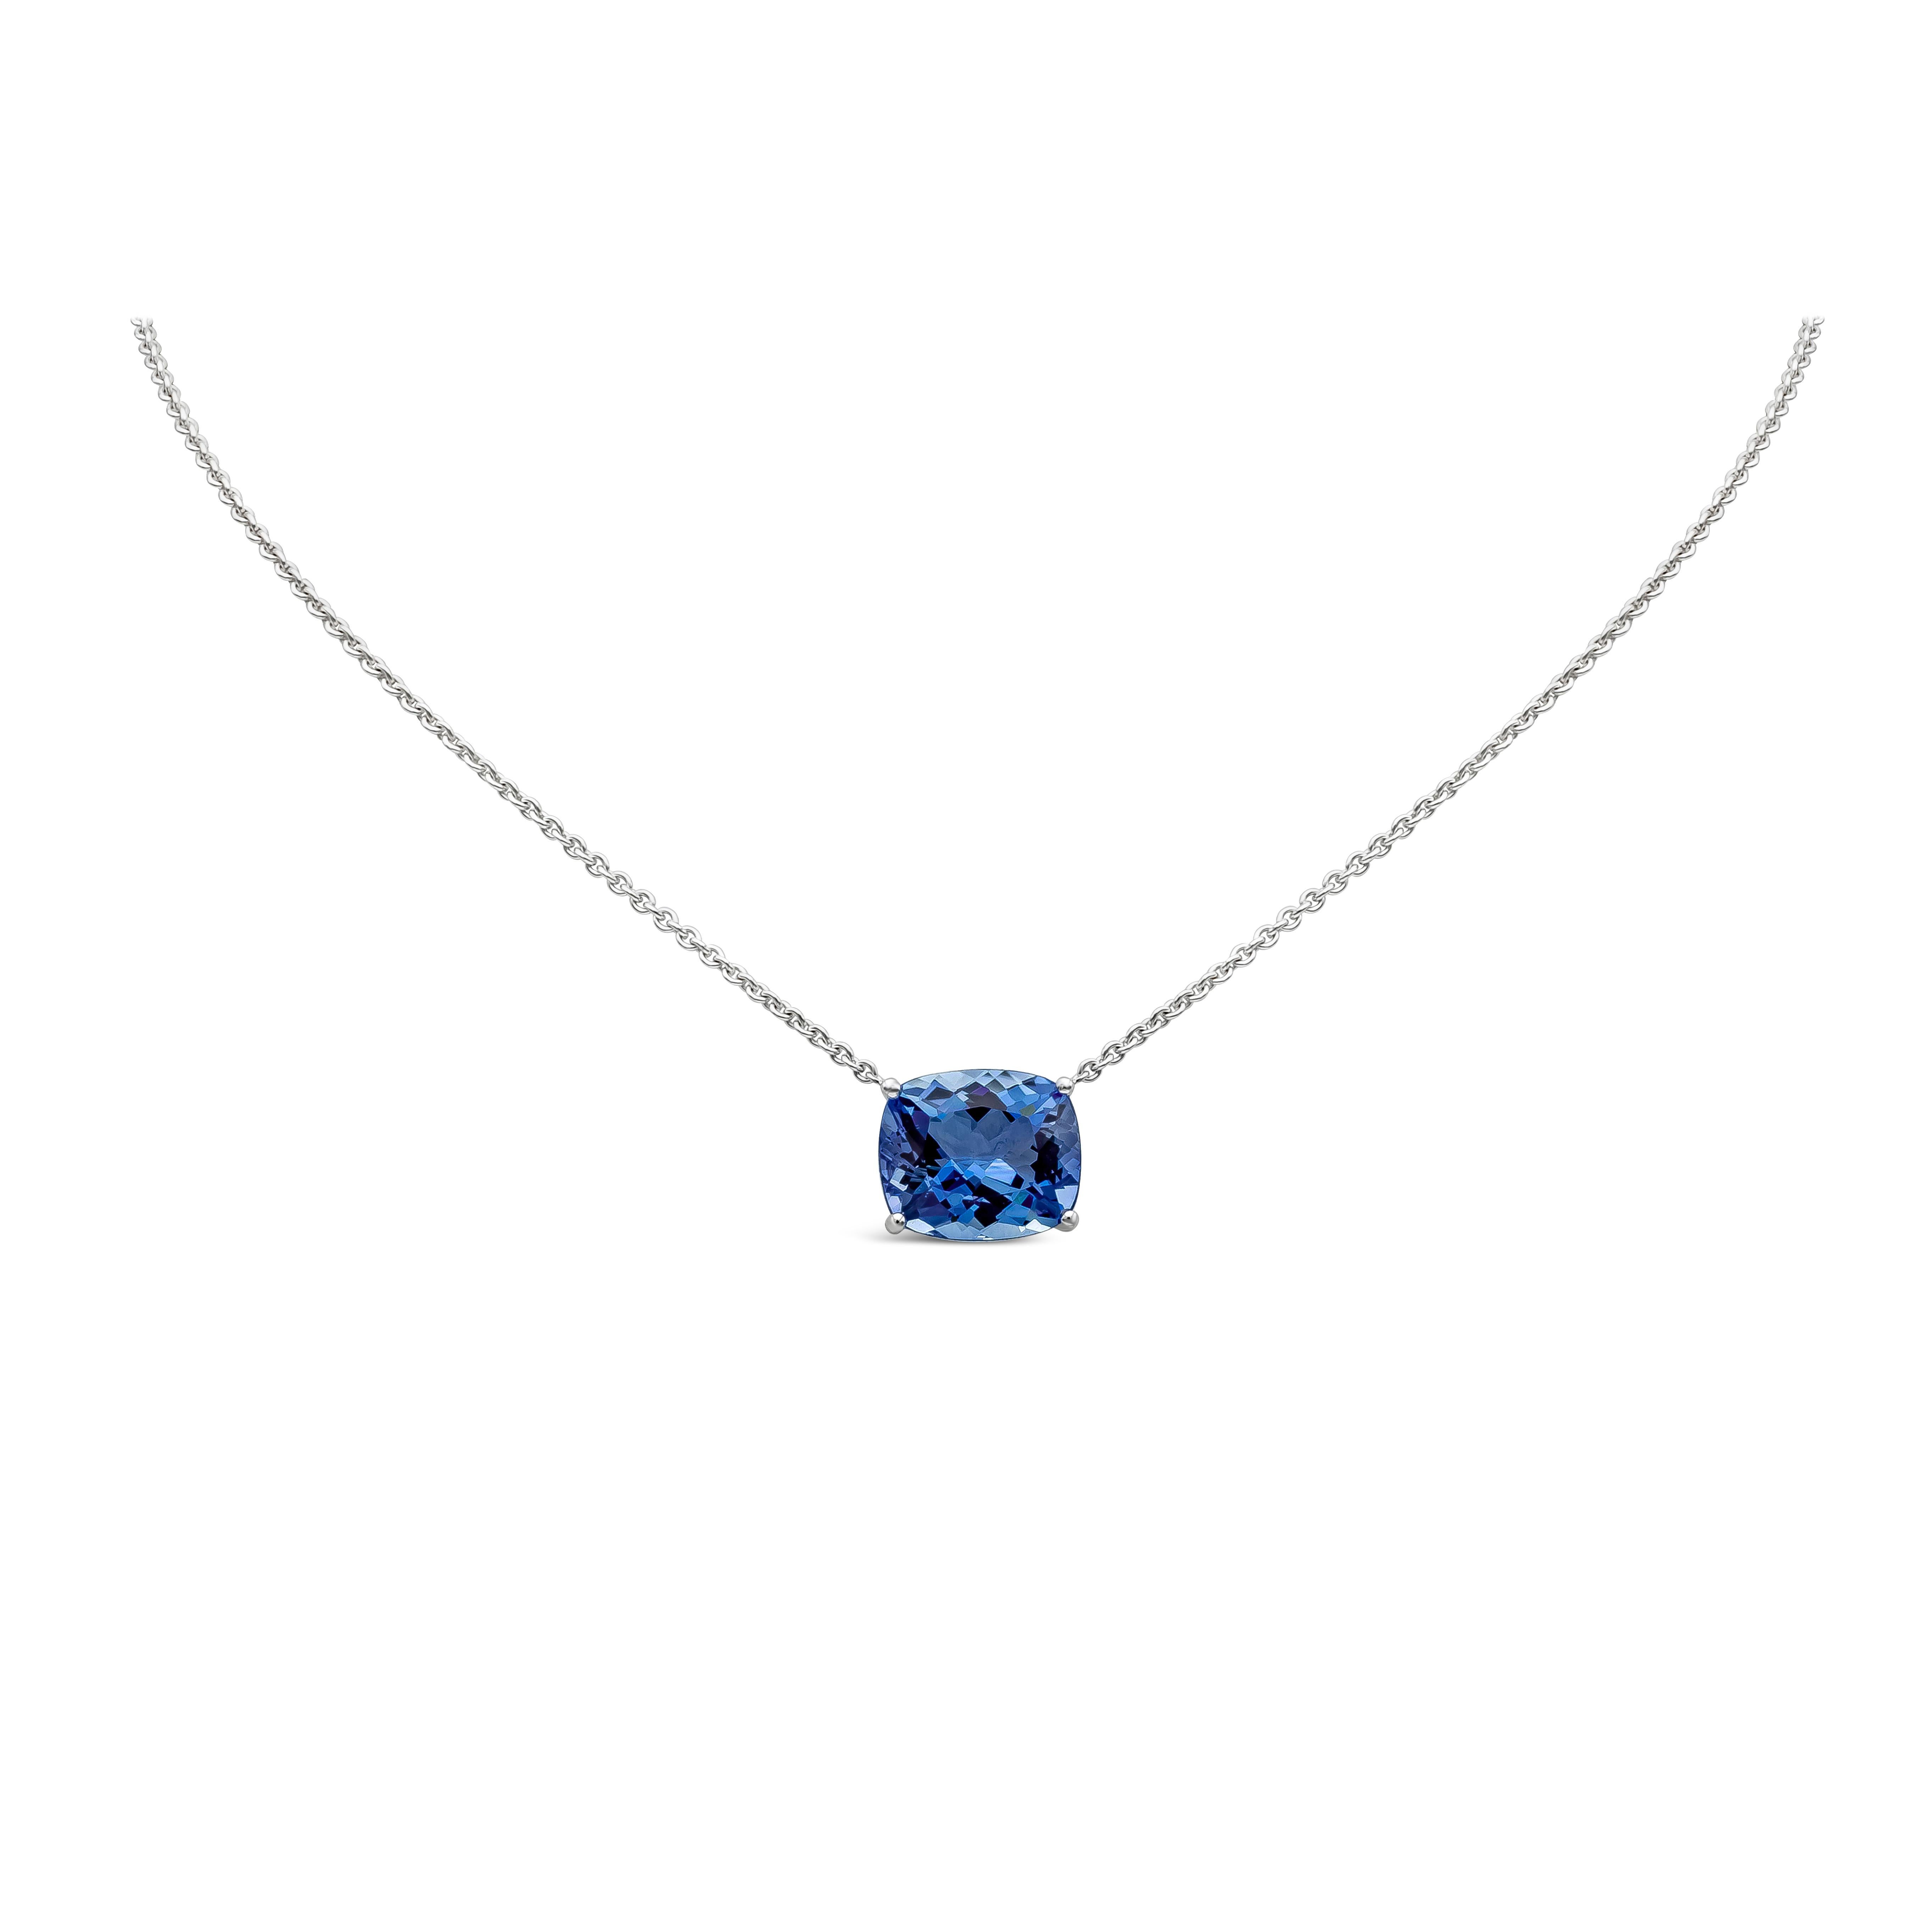 A classic gem stone pendant necklace showcasing a single stone 5.82 carat cushion cut aquamarine. Set in four prong. Made with 18K White Gold. 18 inches in Length. 

Roman Malakov is a custom house, specializing in creating anything you can imagine.